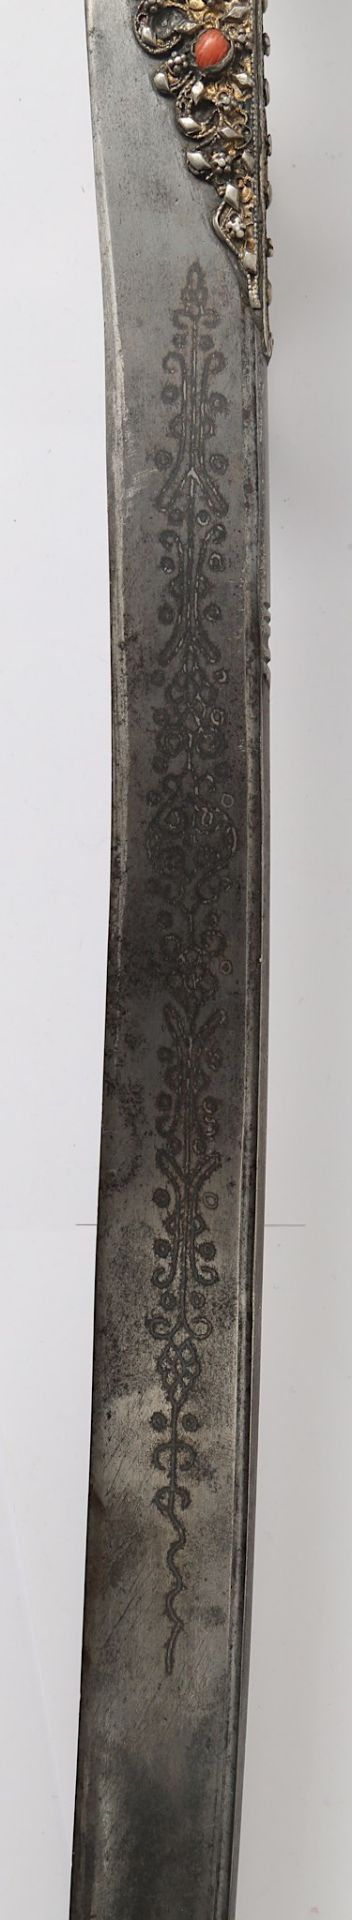 A LARGE-EARED WALRUS IVORY-HILTED YATAGHAN Ottoman - Image 9 of 9